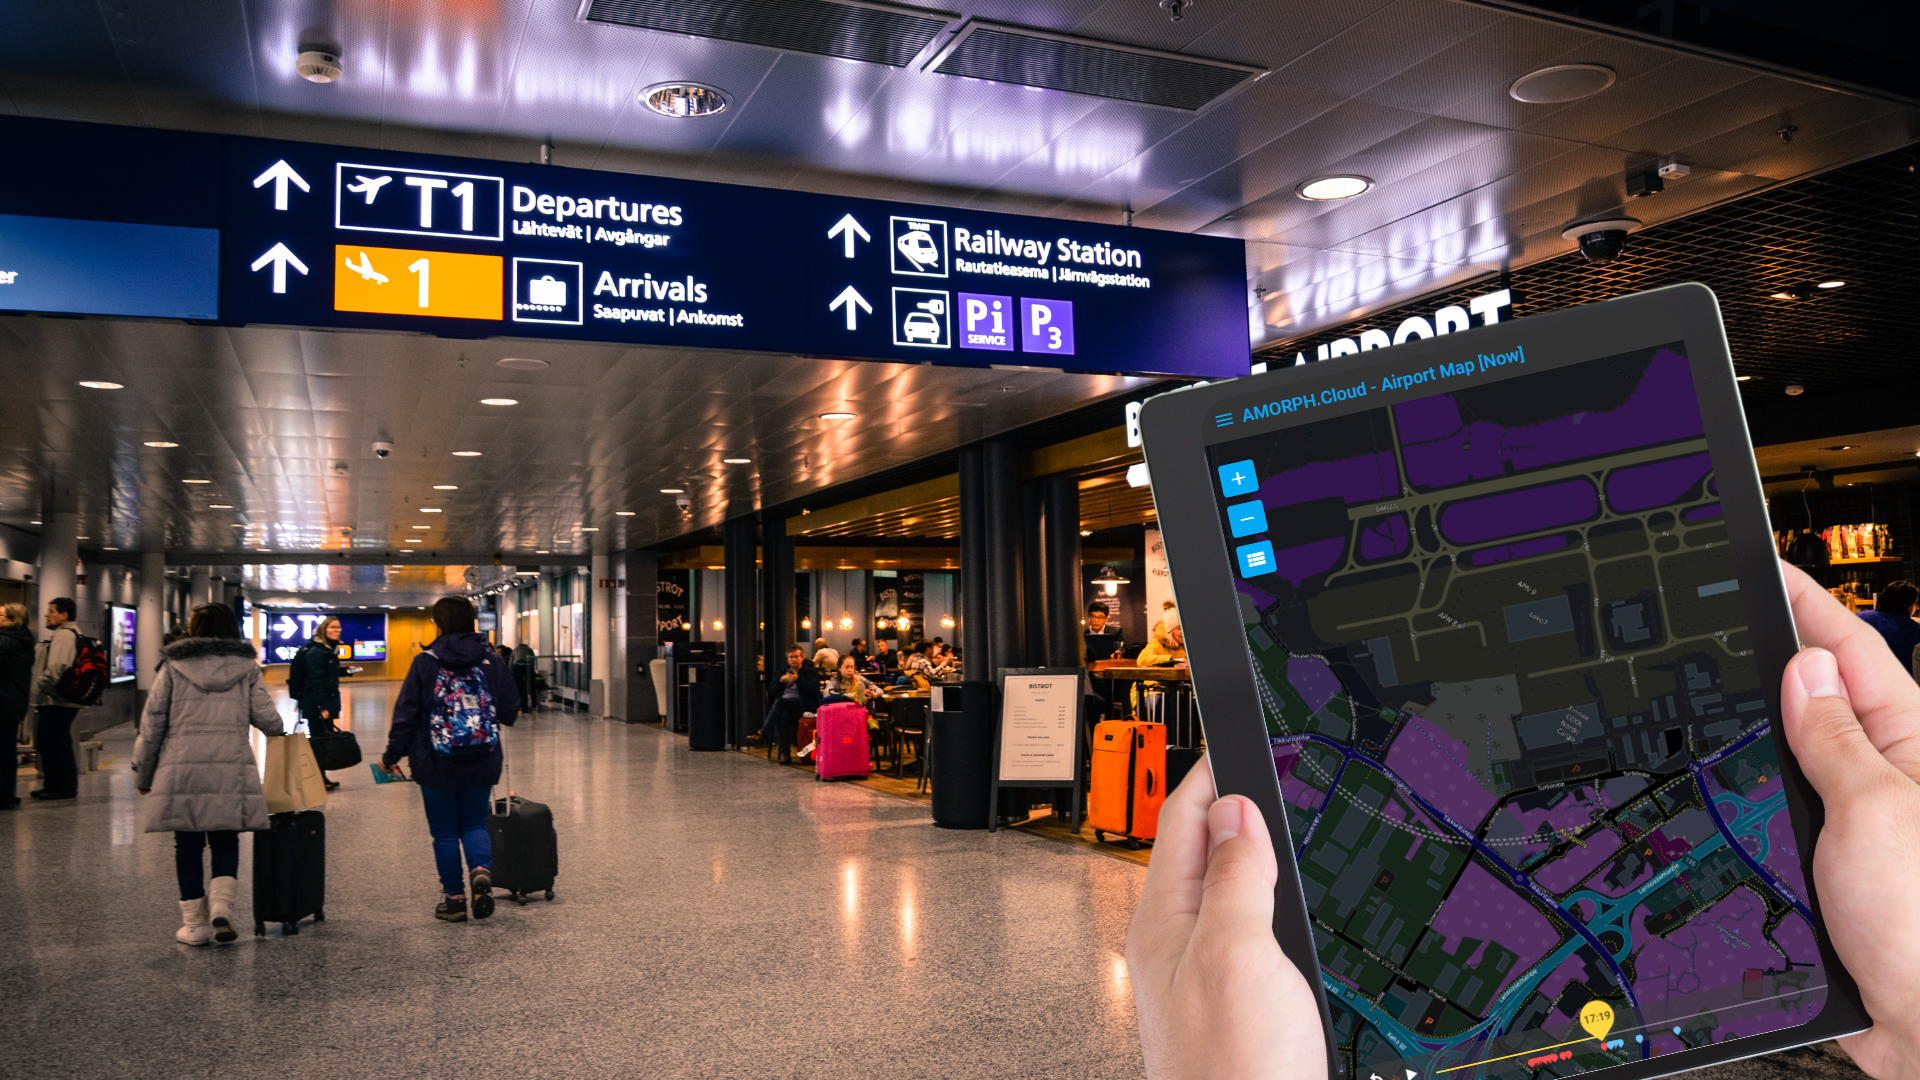 AMORPH.aero Cloud Platform: Designed to empower airport and terminal operators with real-time access to critical data, AMORPH.aero streamlines operations planning and management. Harness the power of the cloud for enhanced efficiency and responsiveness.